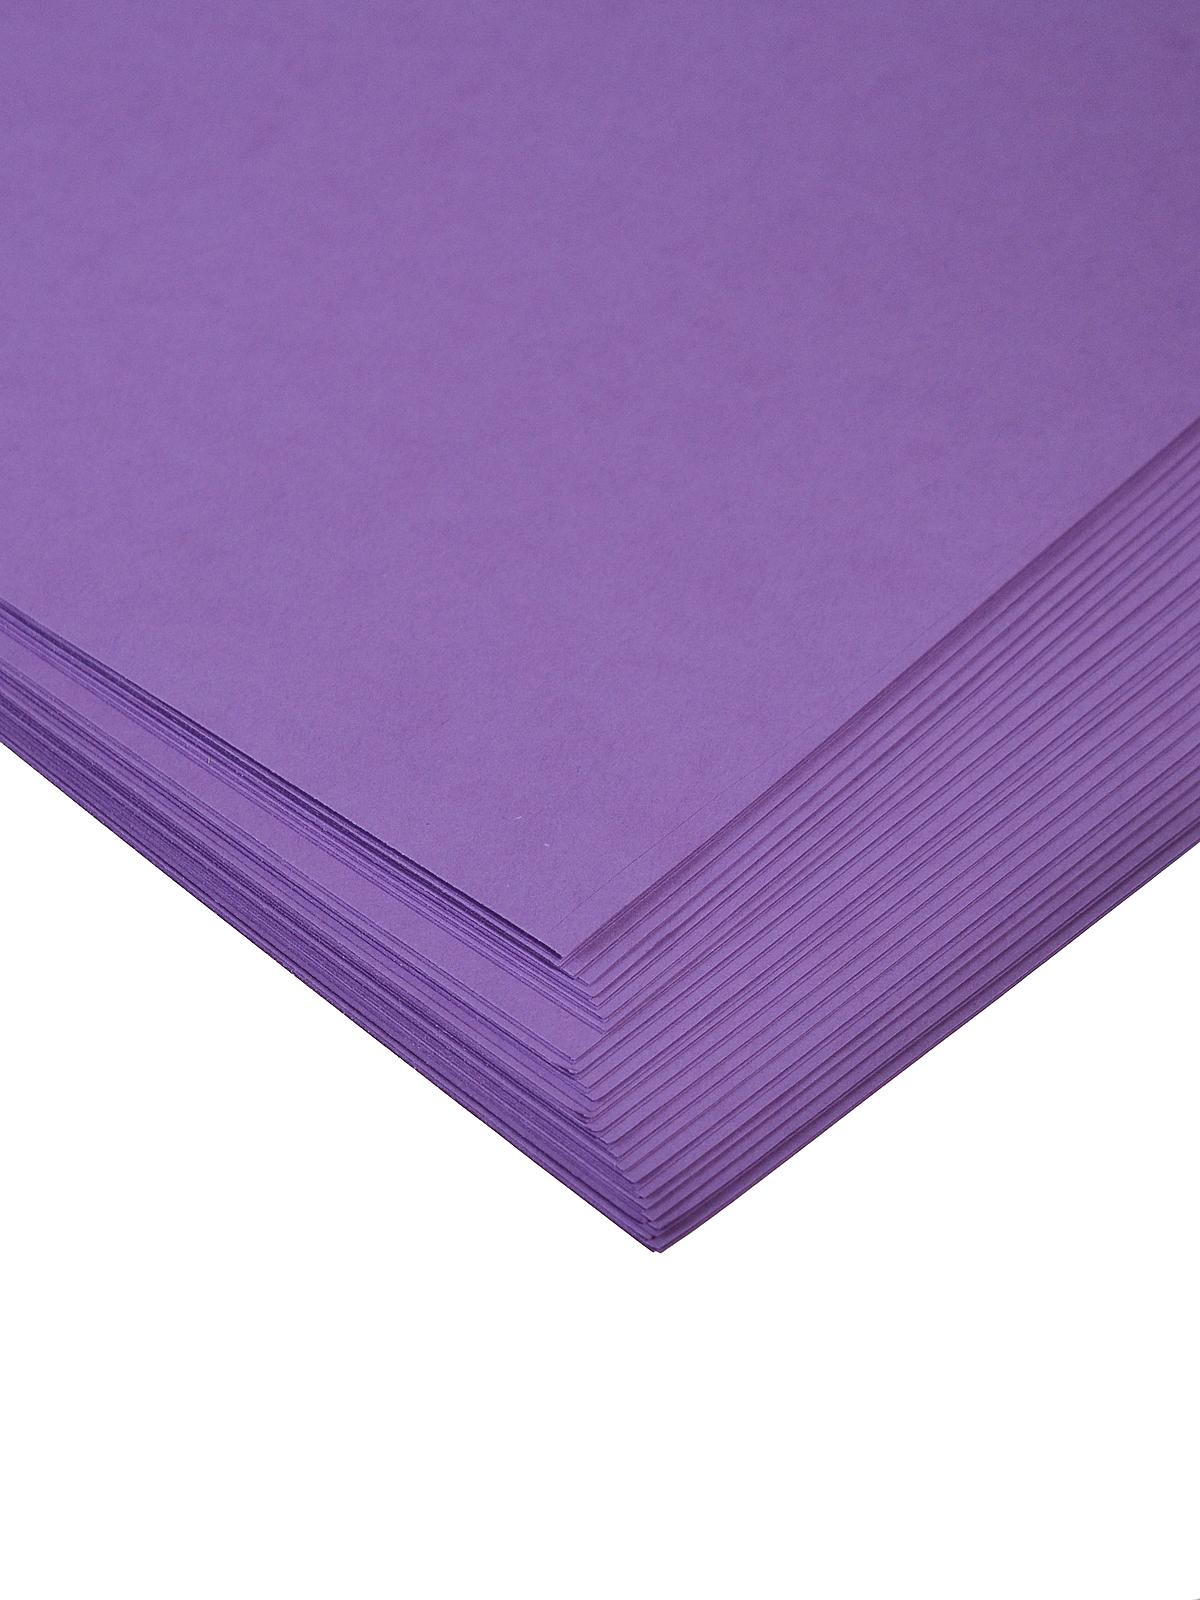 Sulphite Construction Paper Violet 12 In. X 18 In. 50 Sheets